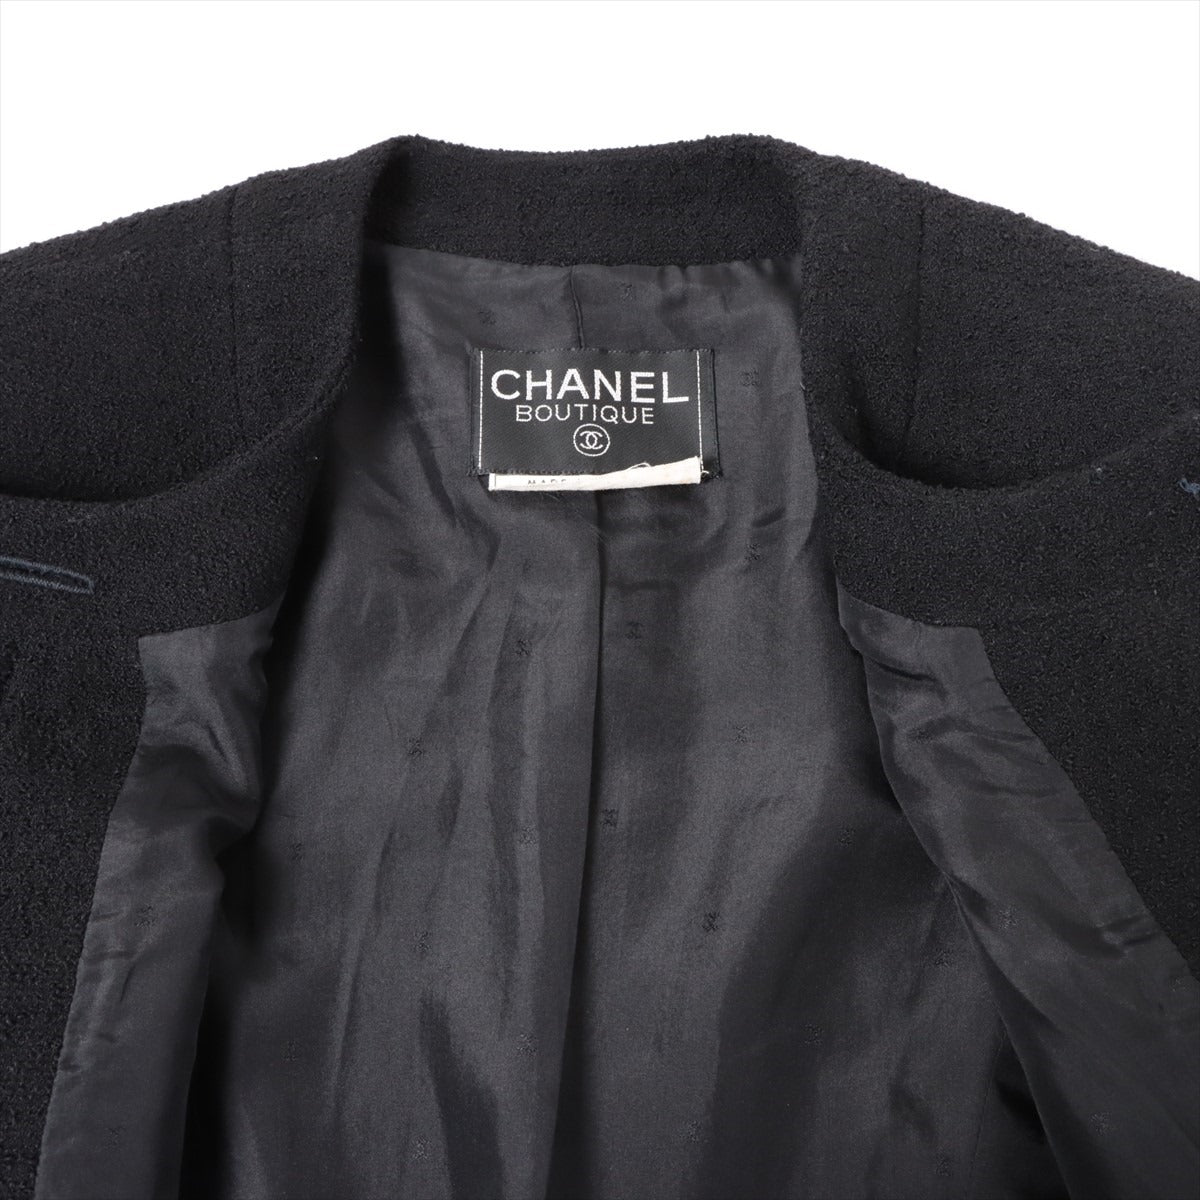 Chanel Wool Setup Jacket size unknown/skirt 38 Ladies' Black  20909 External button hook repair jacket without quality tag